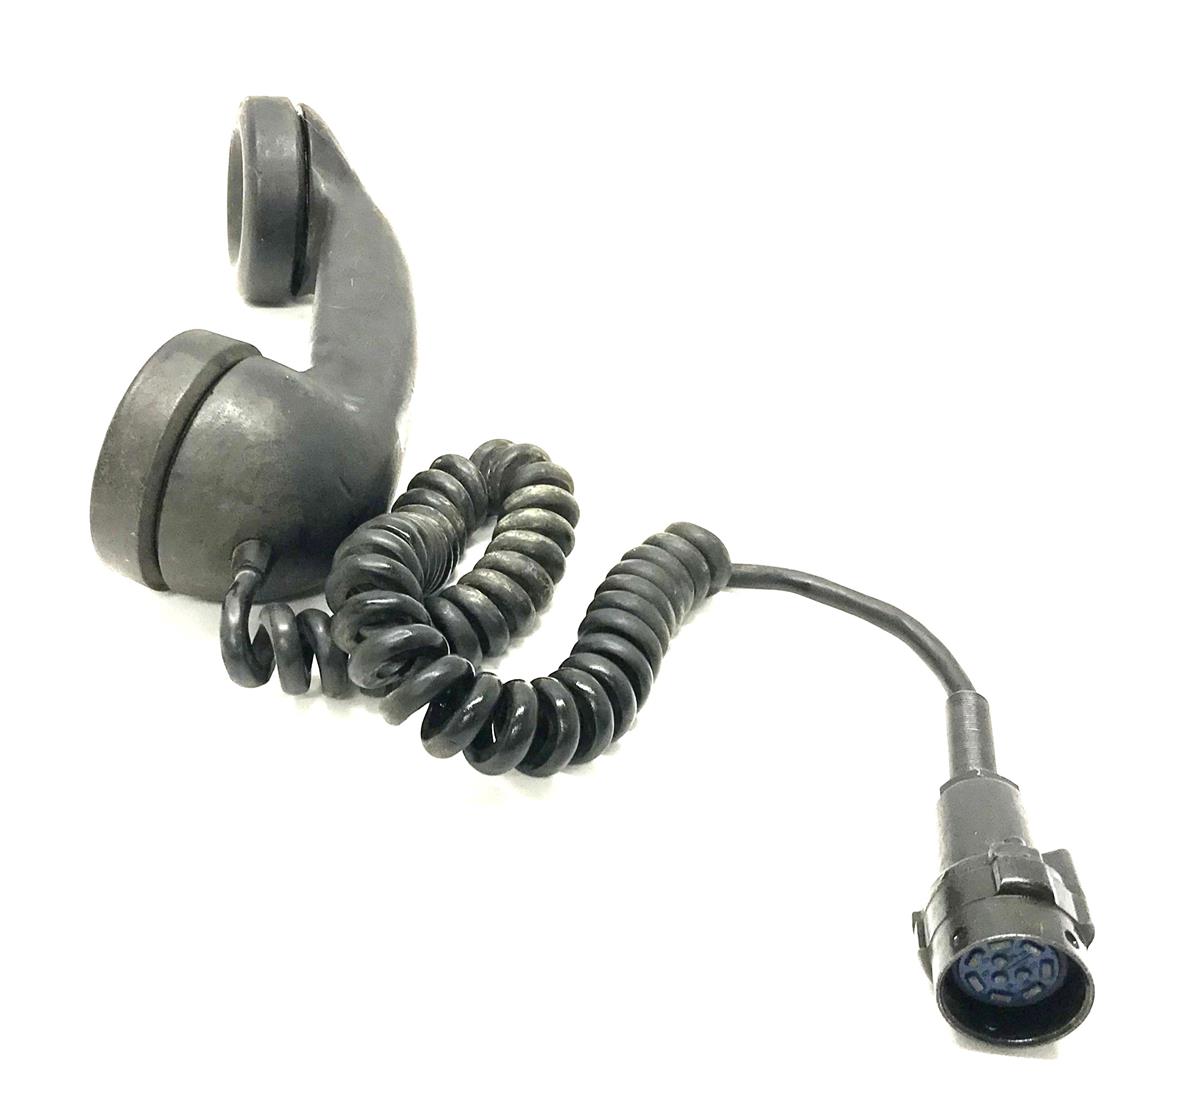 SP-2250 | SP-2250  ANGSA-6C Chest Set Group With Headset Microphone and Handset with U-77U Connector  (44).JPG